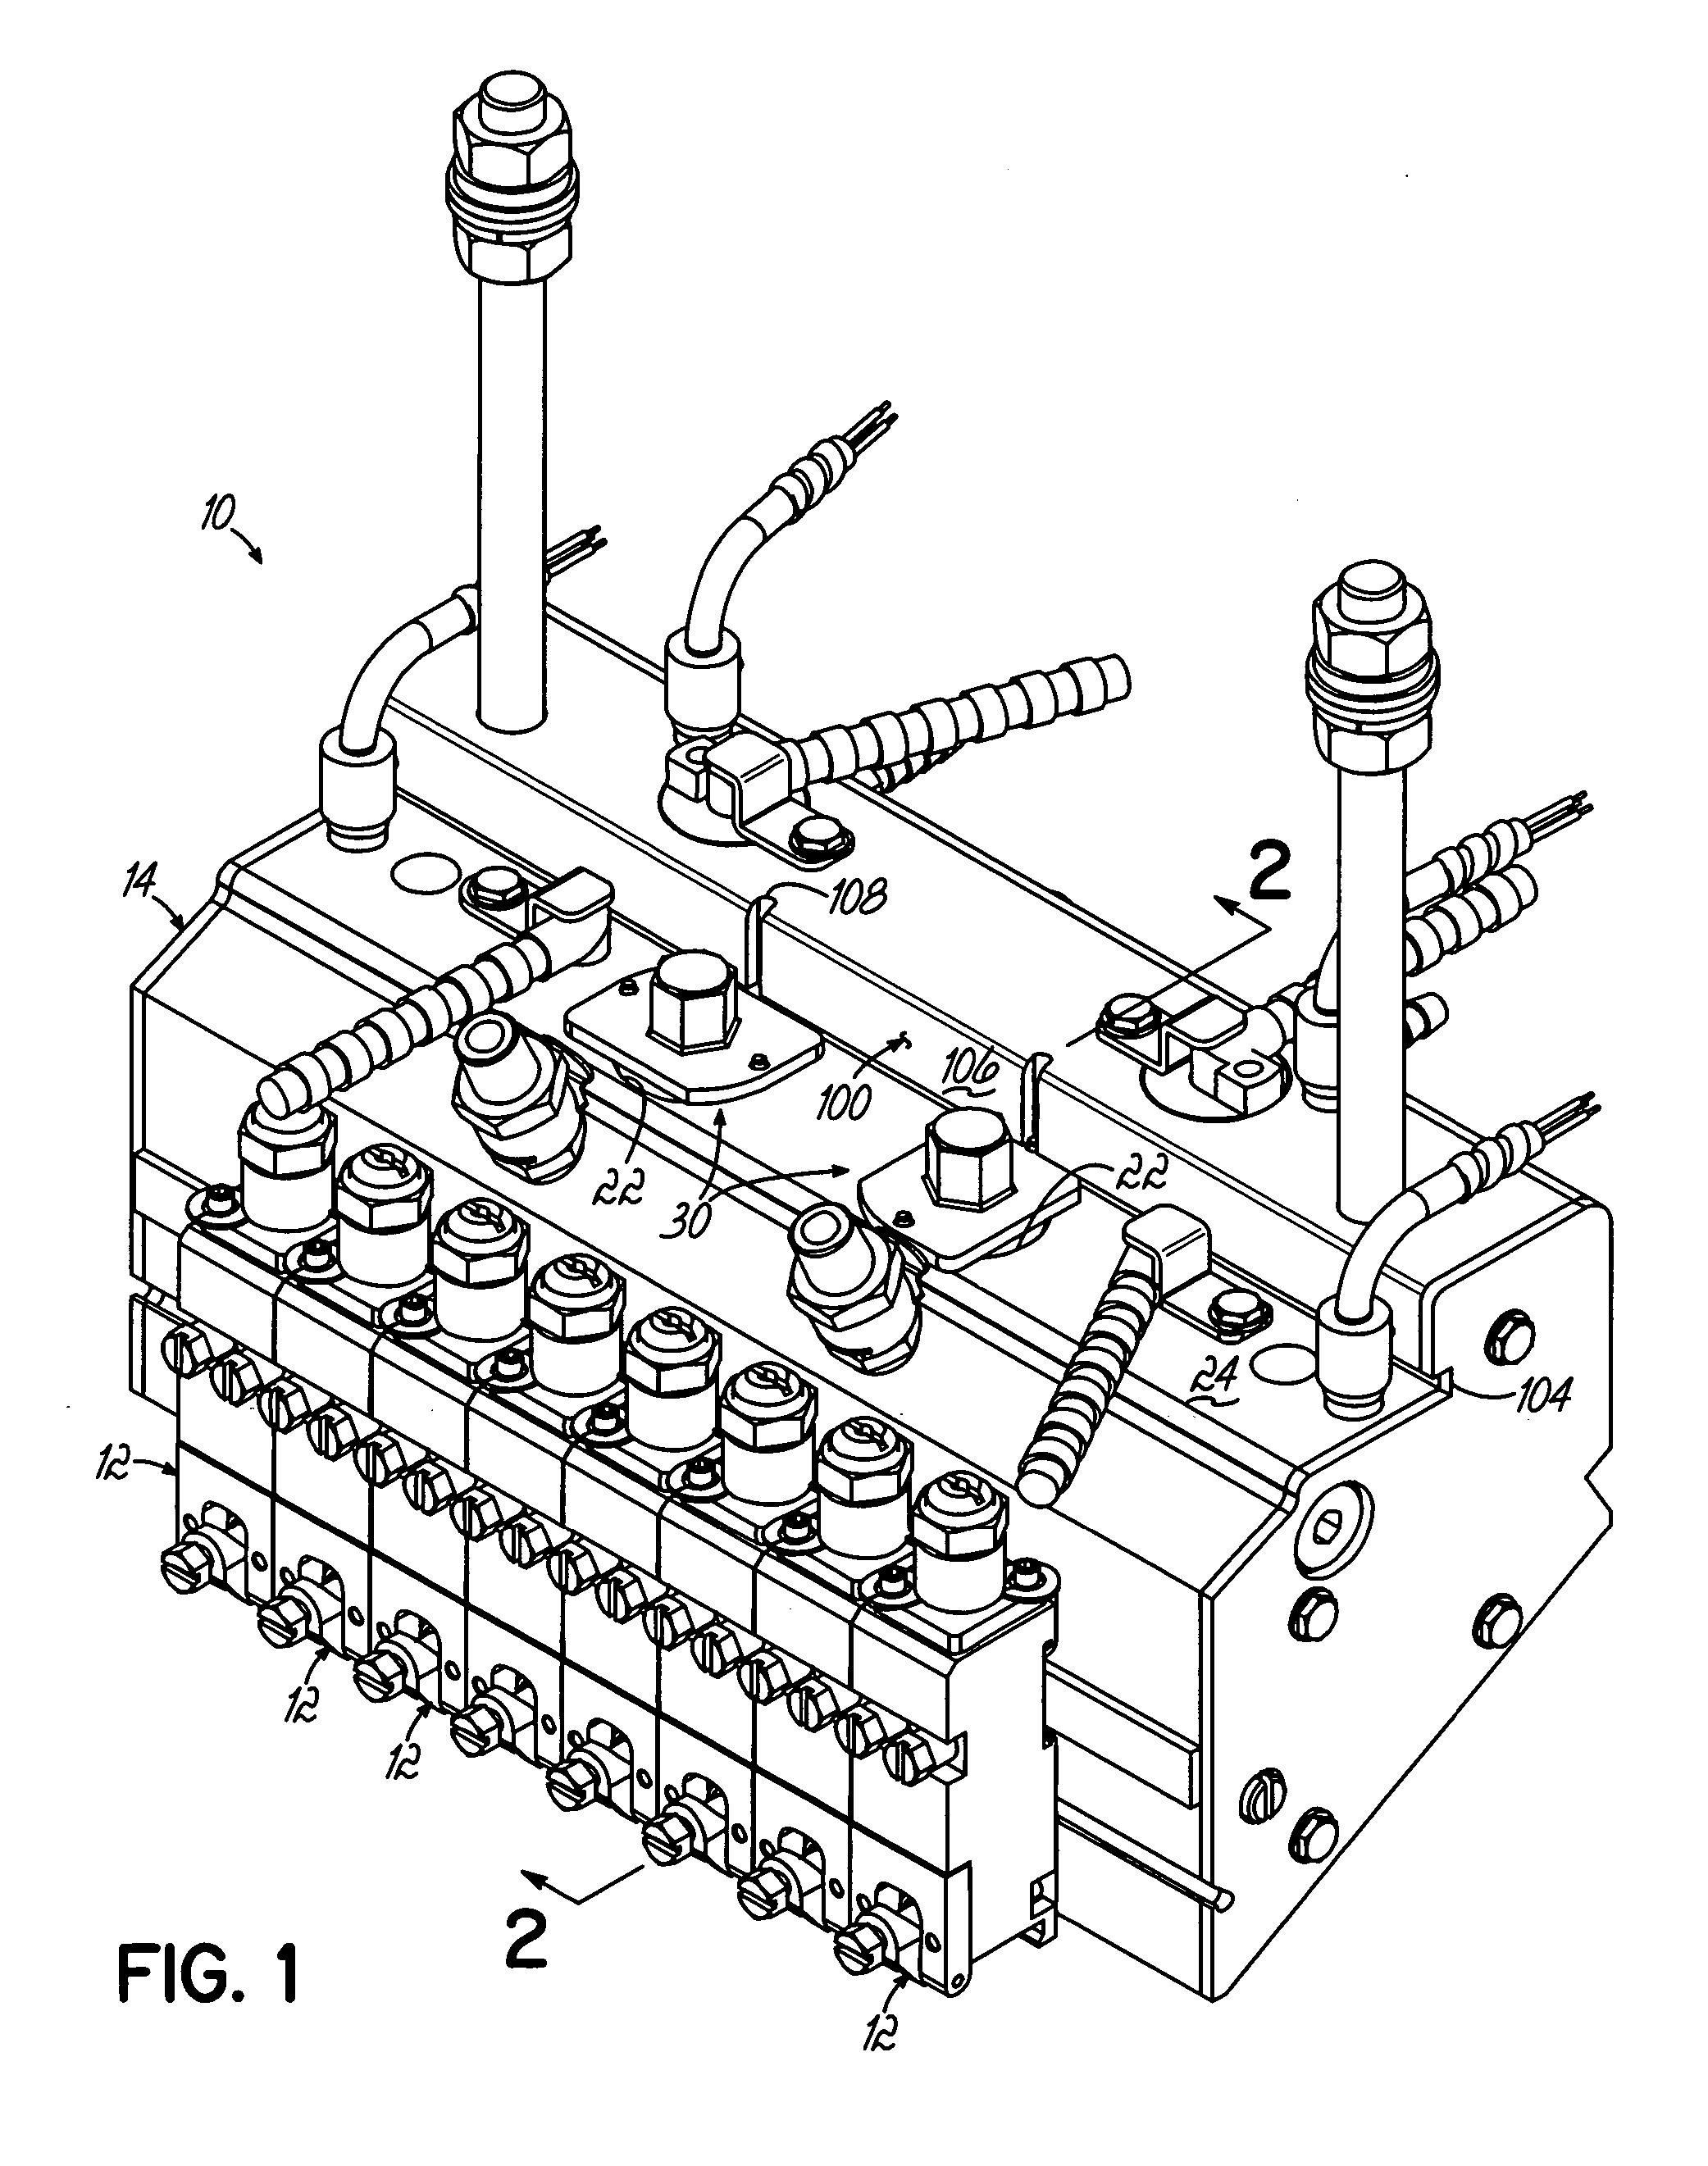 Filter assembly for a liquid dispensing apparatus